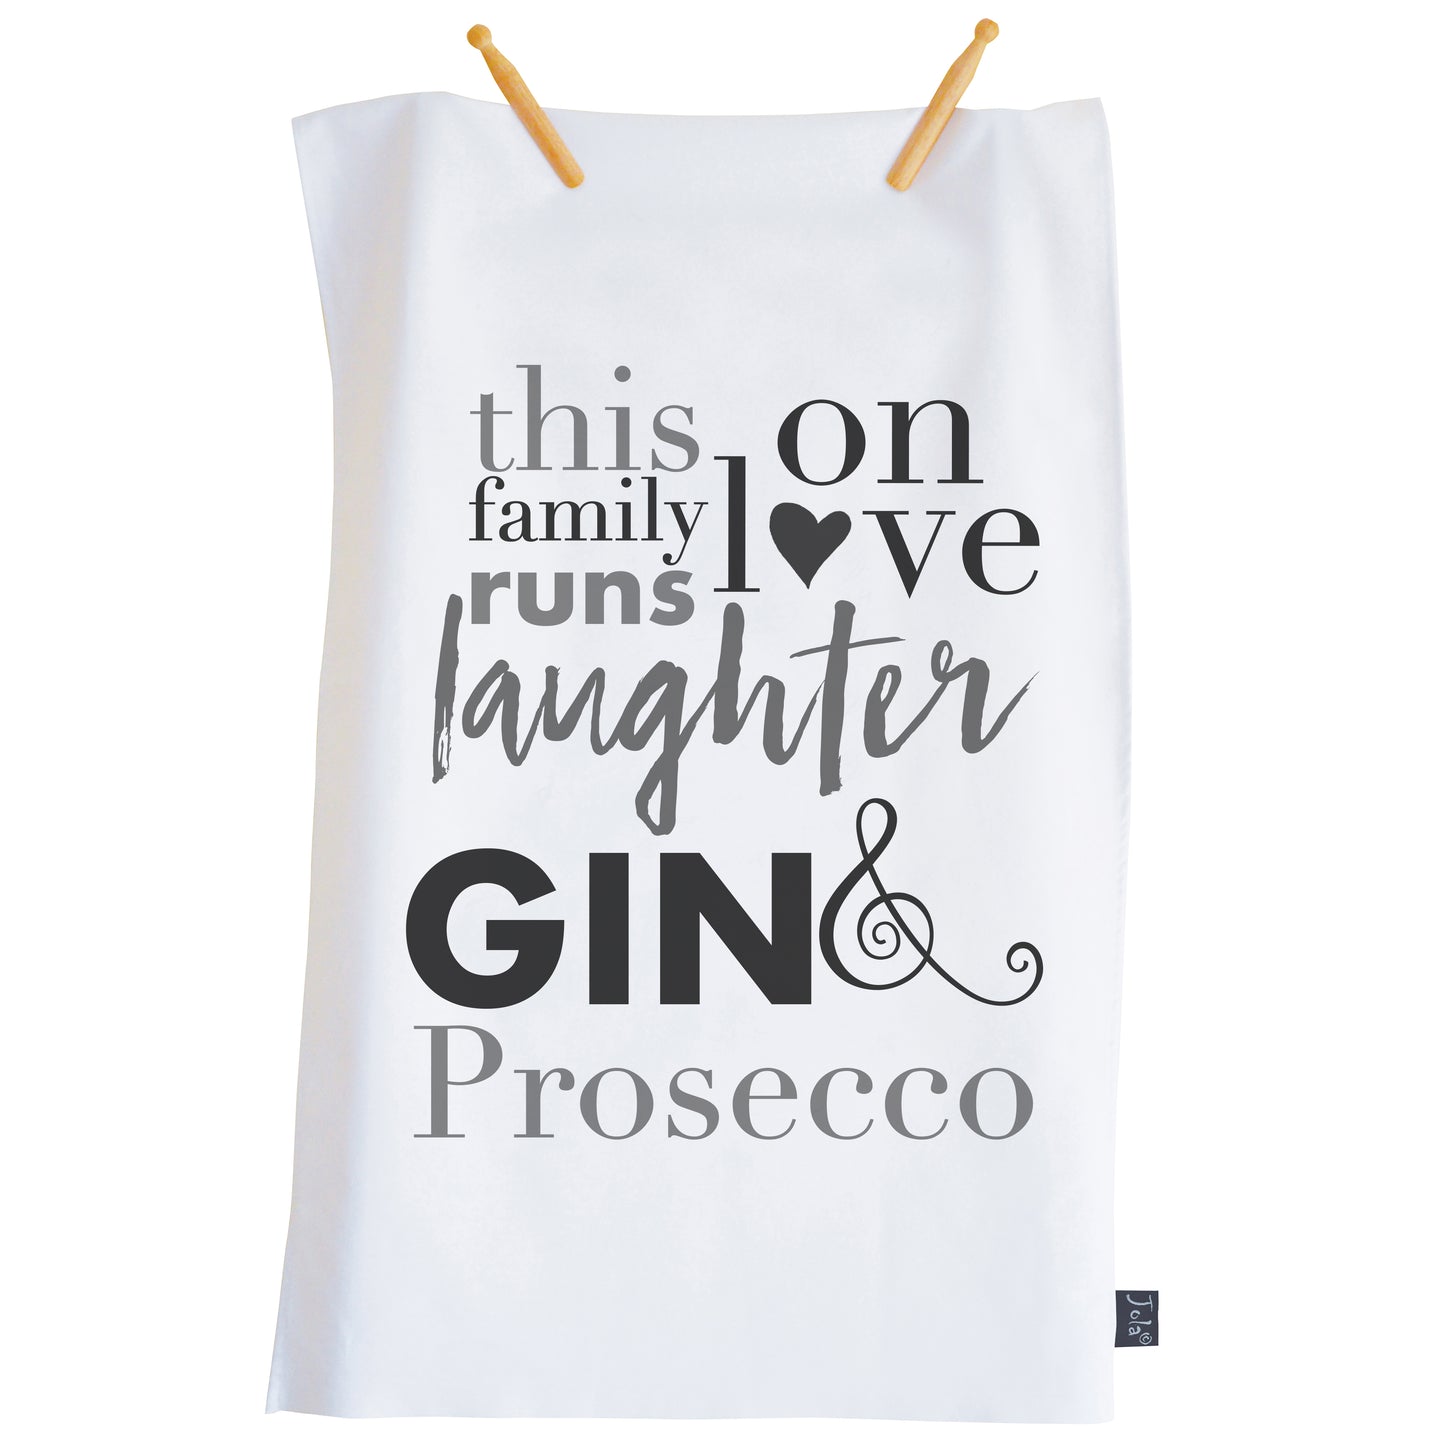 This Family Gin & Prosecco Tea towel